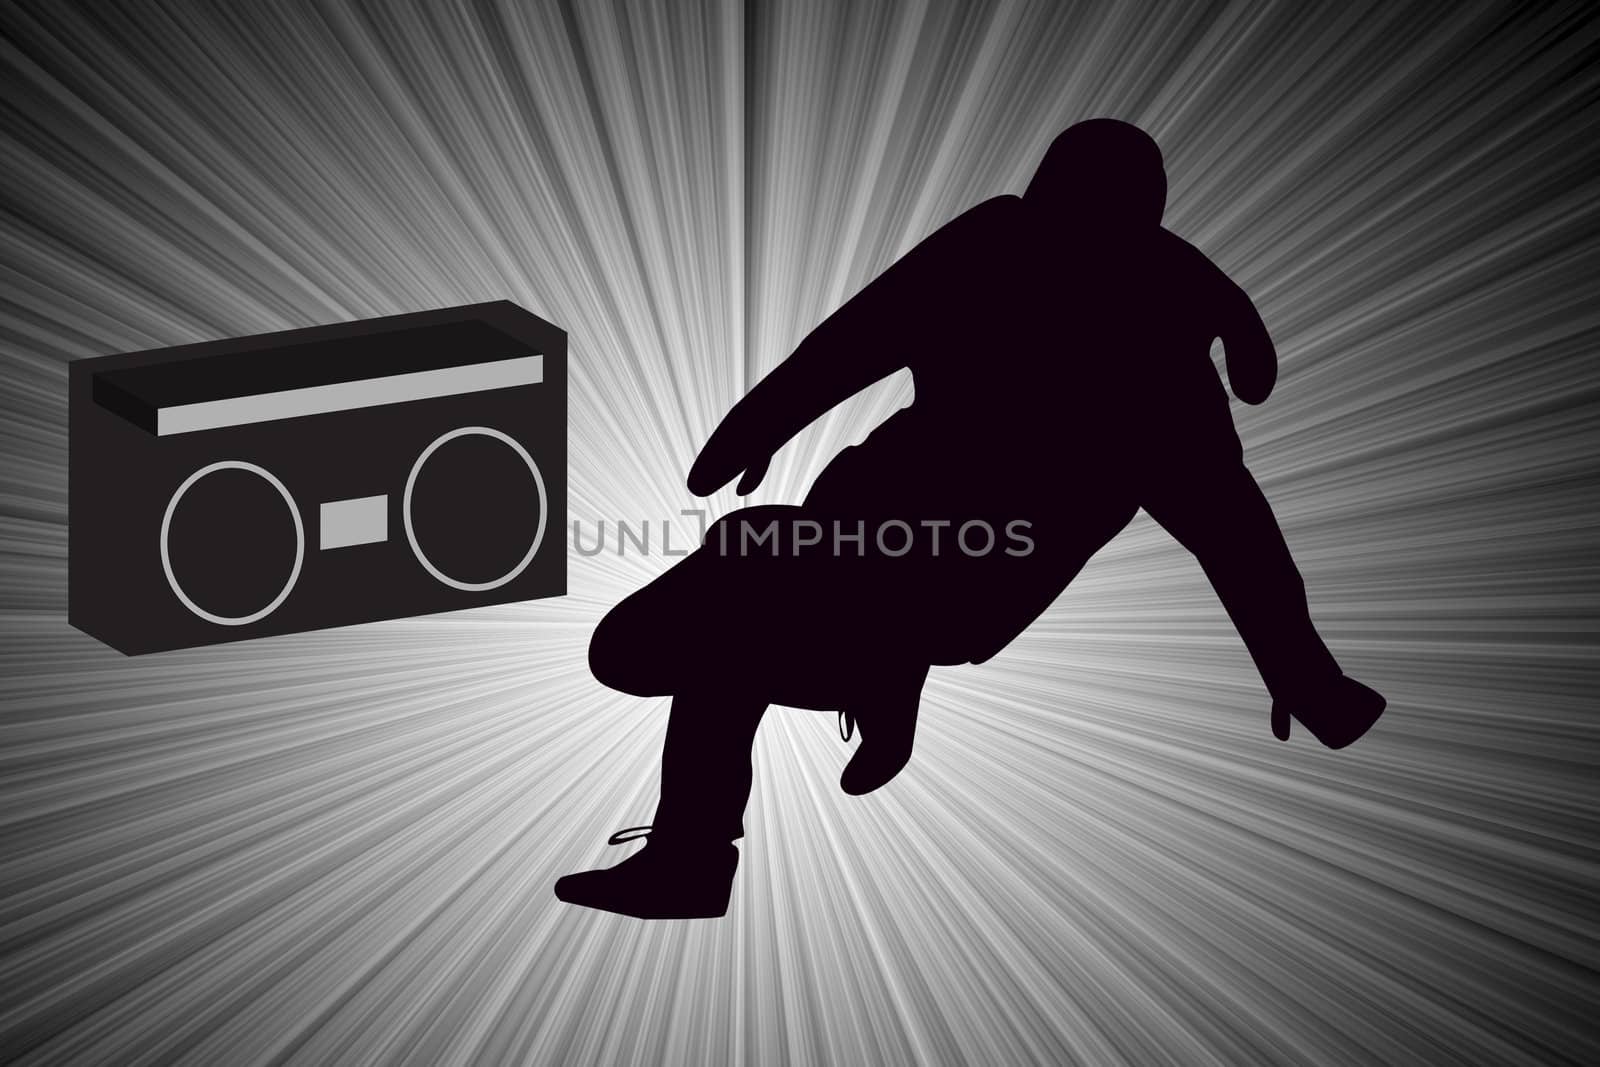 Breakdancer Dancing with Old School Boom Box Silhouette by mwp1969